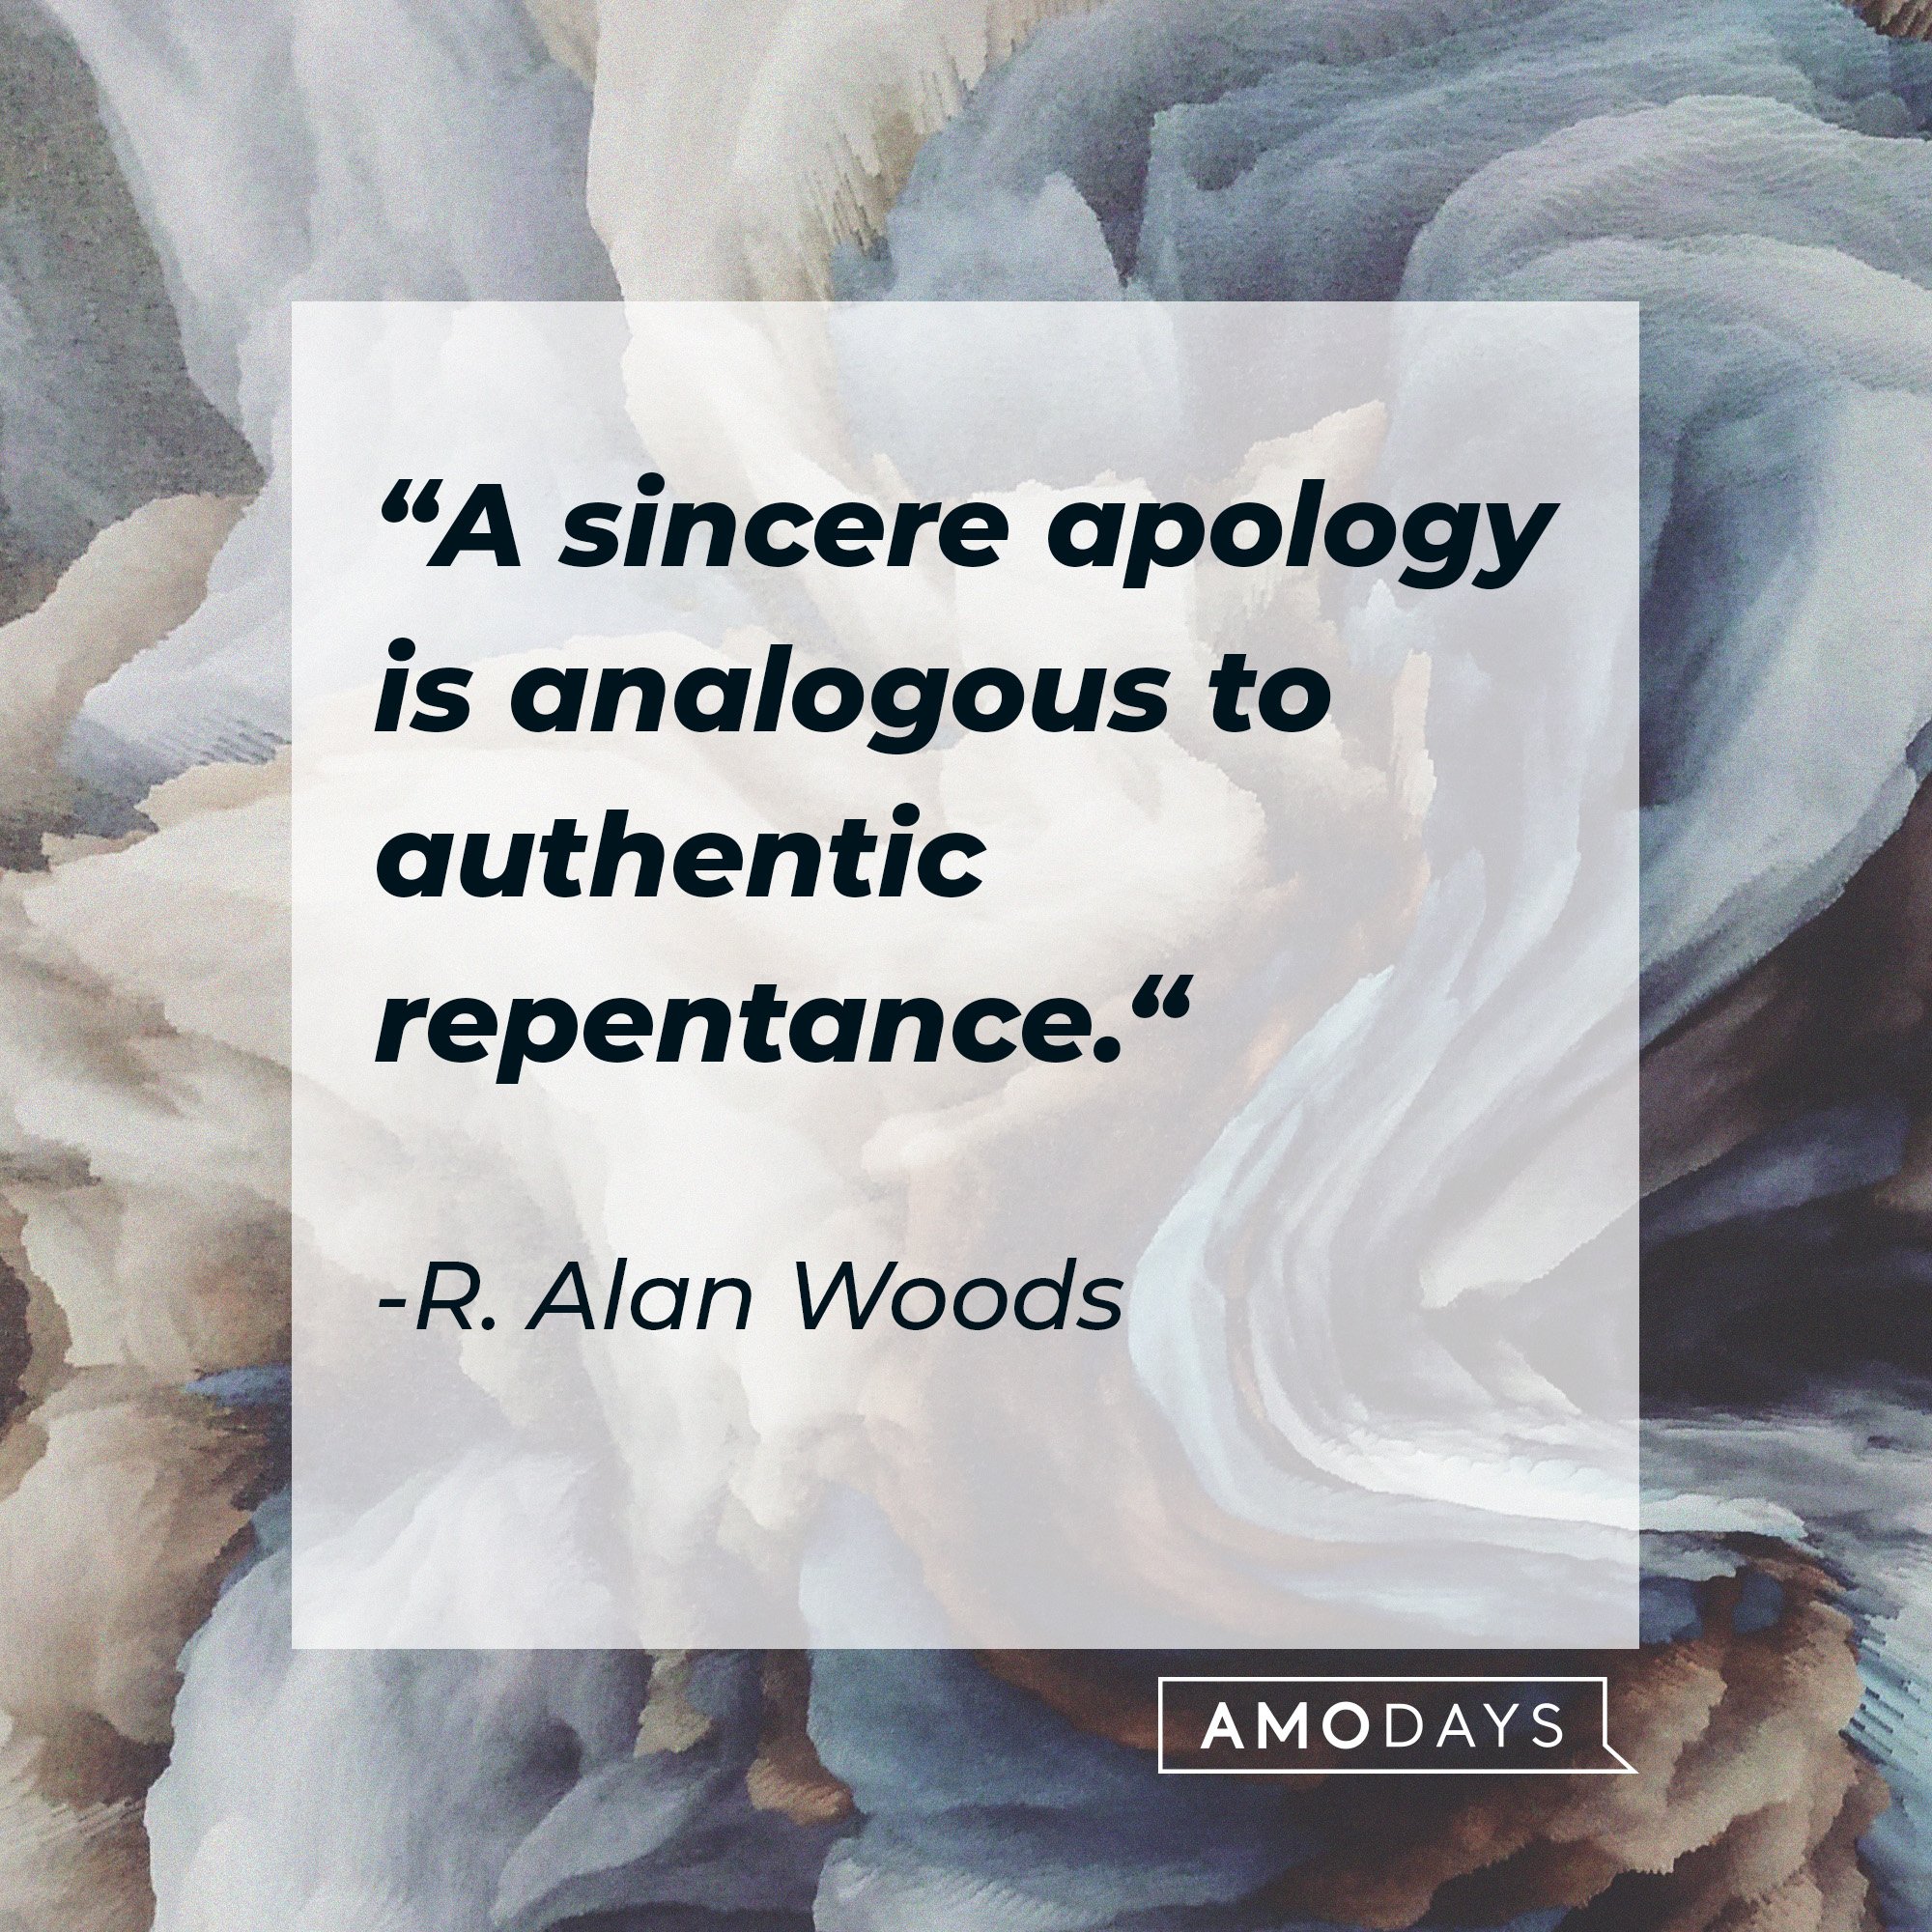 “A sincere apology is analogous to authentic repentance.“ | Image: AmoDays